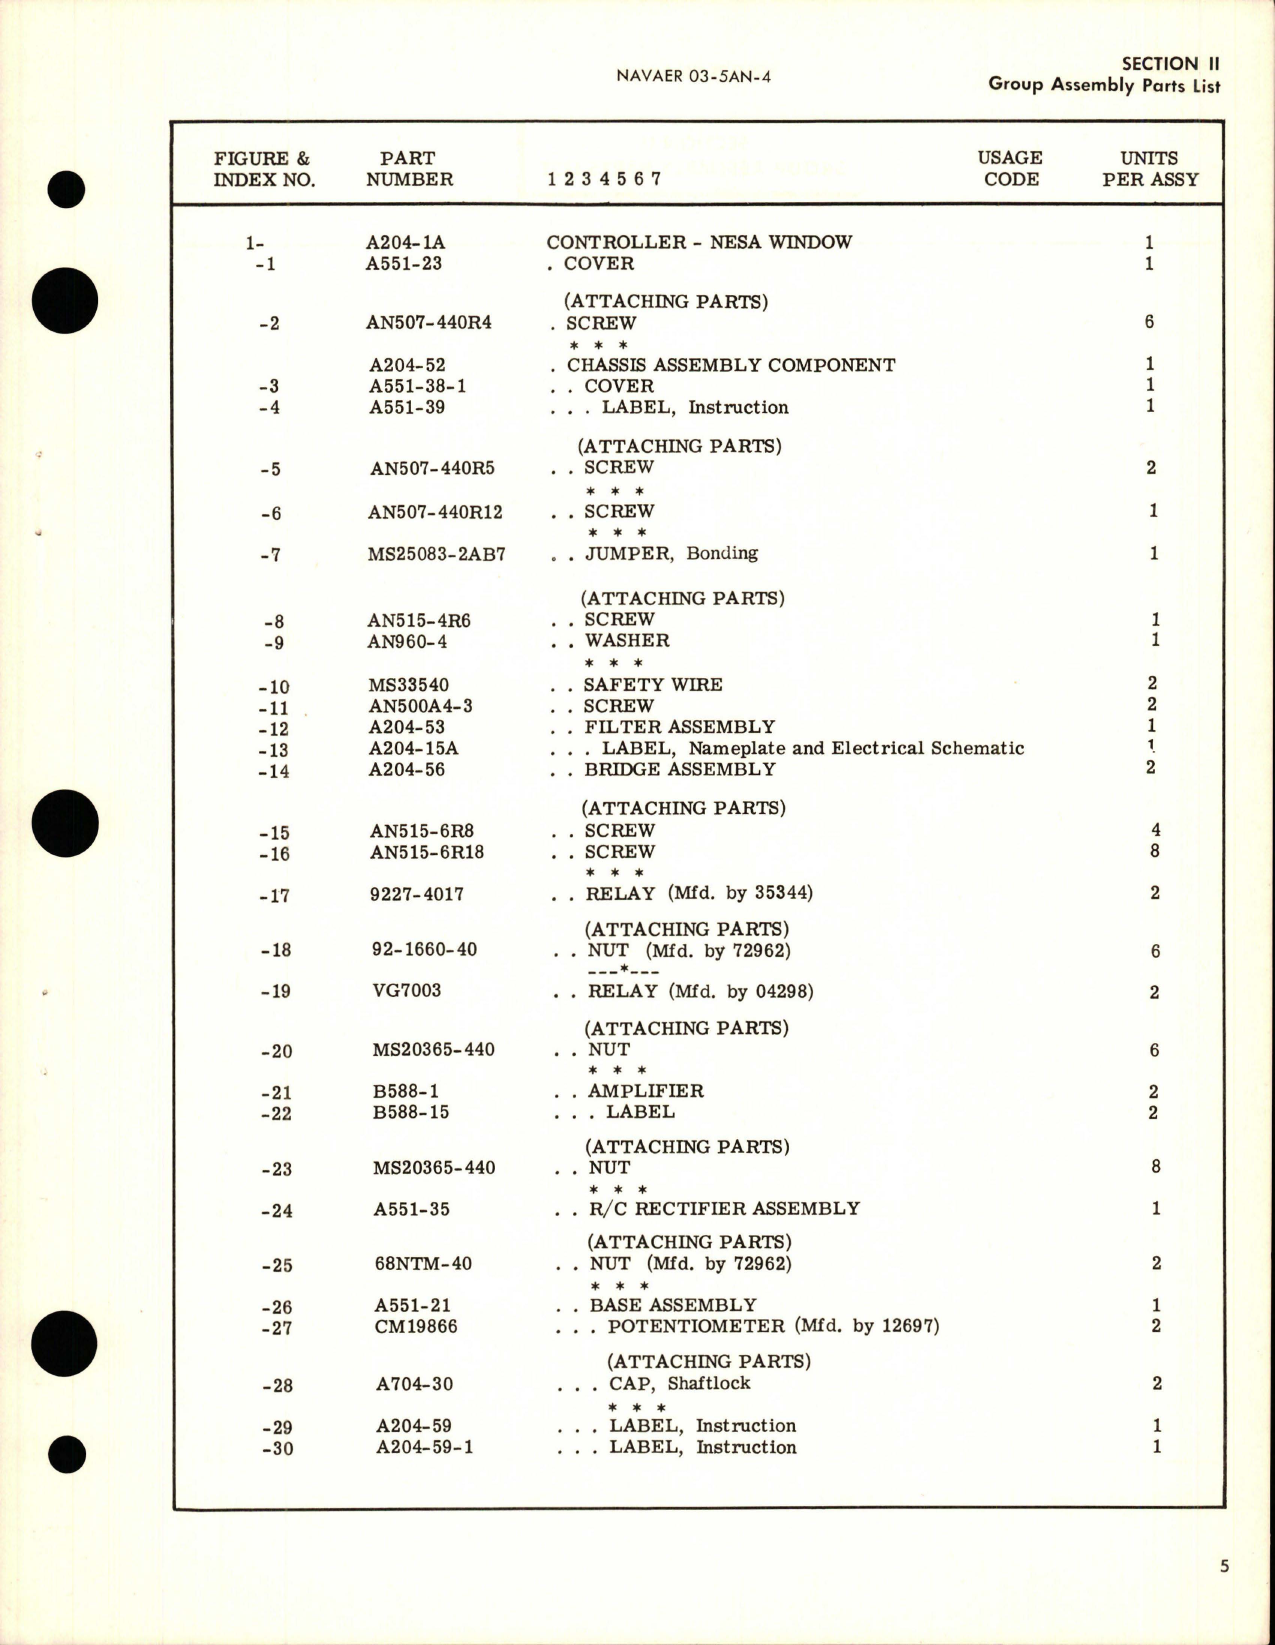 Sample page 5 from AirCorps Library document: Illustrated Parts Breakdown for Nesa Window Controller - Part A204-1A 